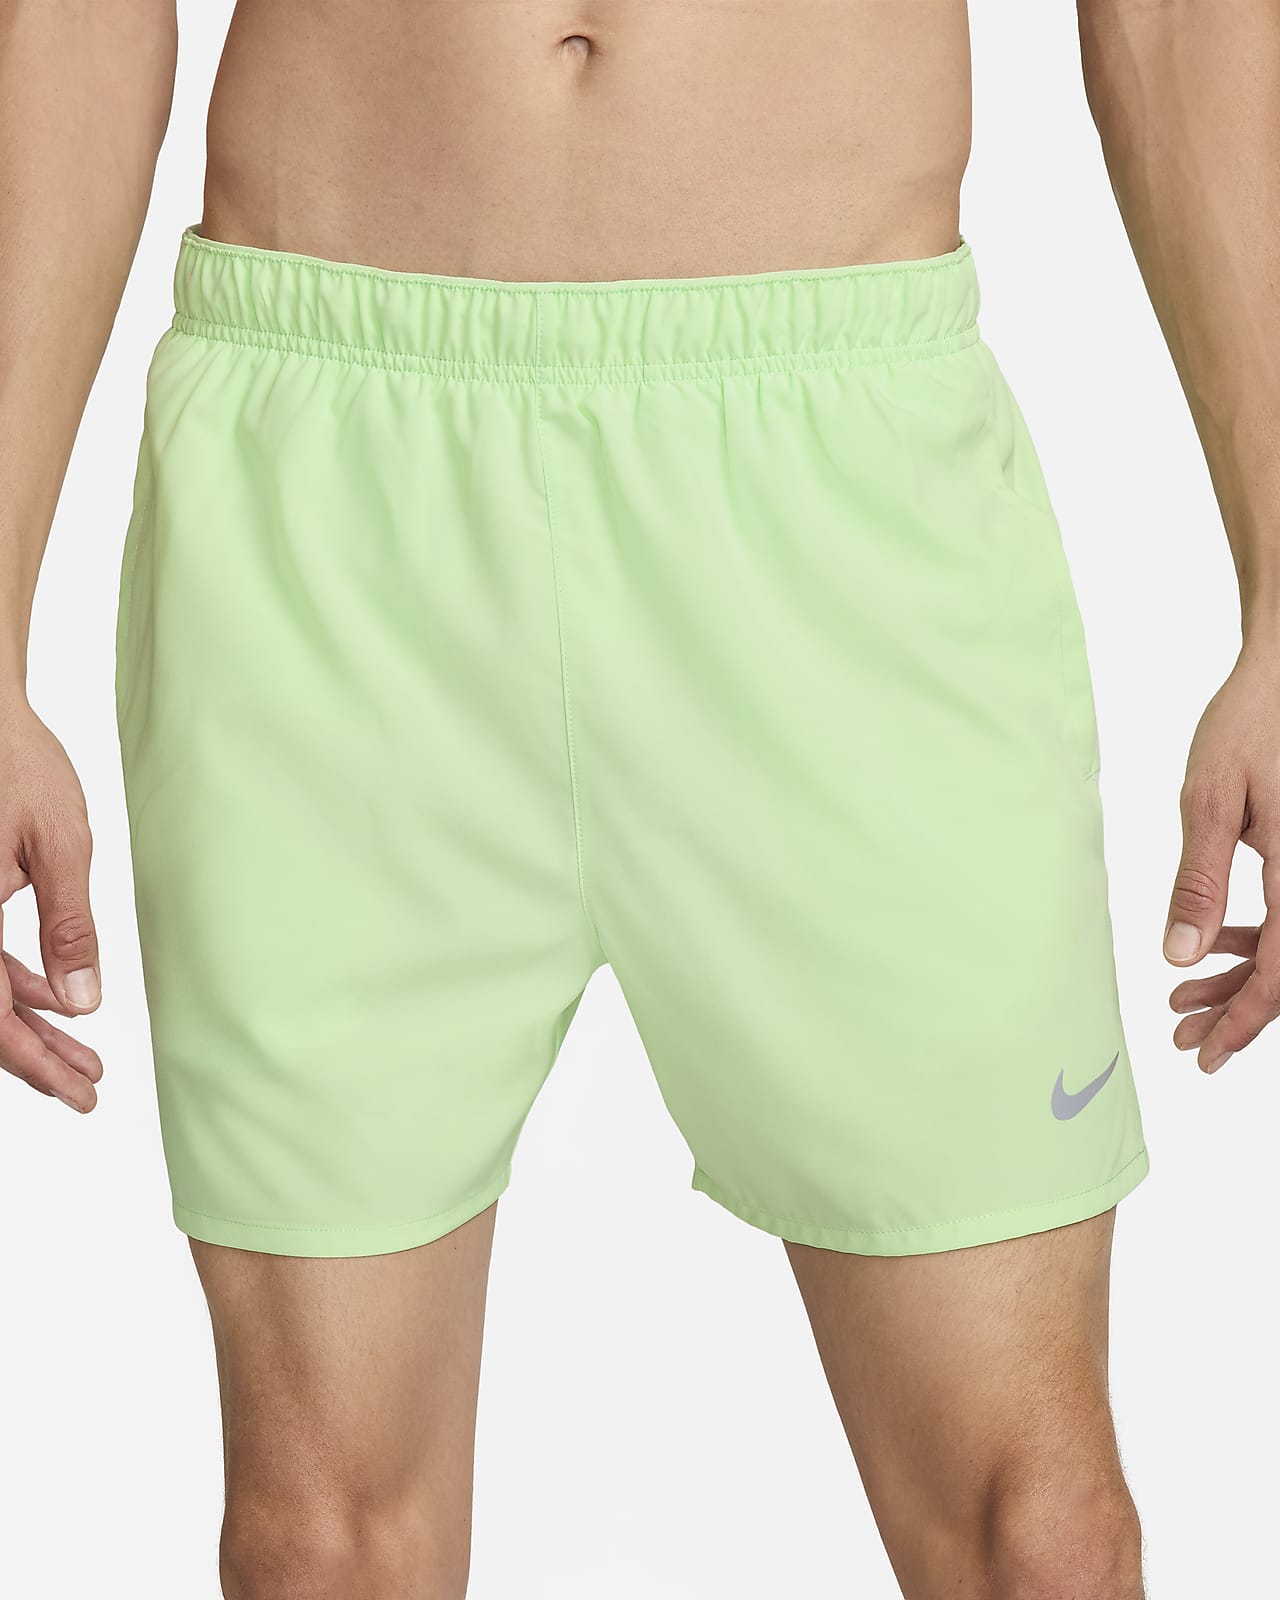 Runner's Guide to Wearing Compression Shorts. Nike JP